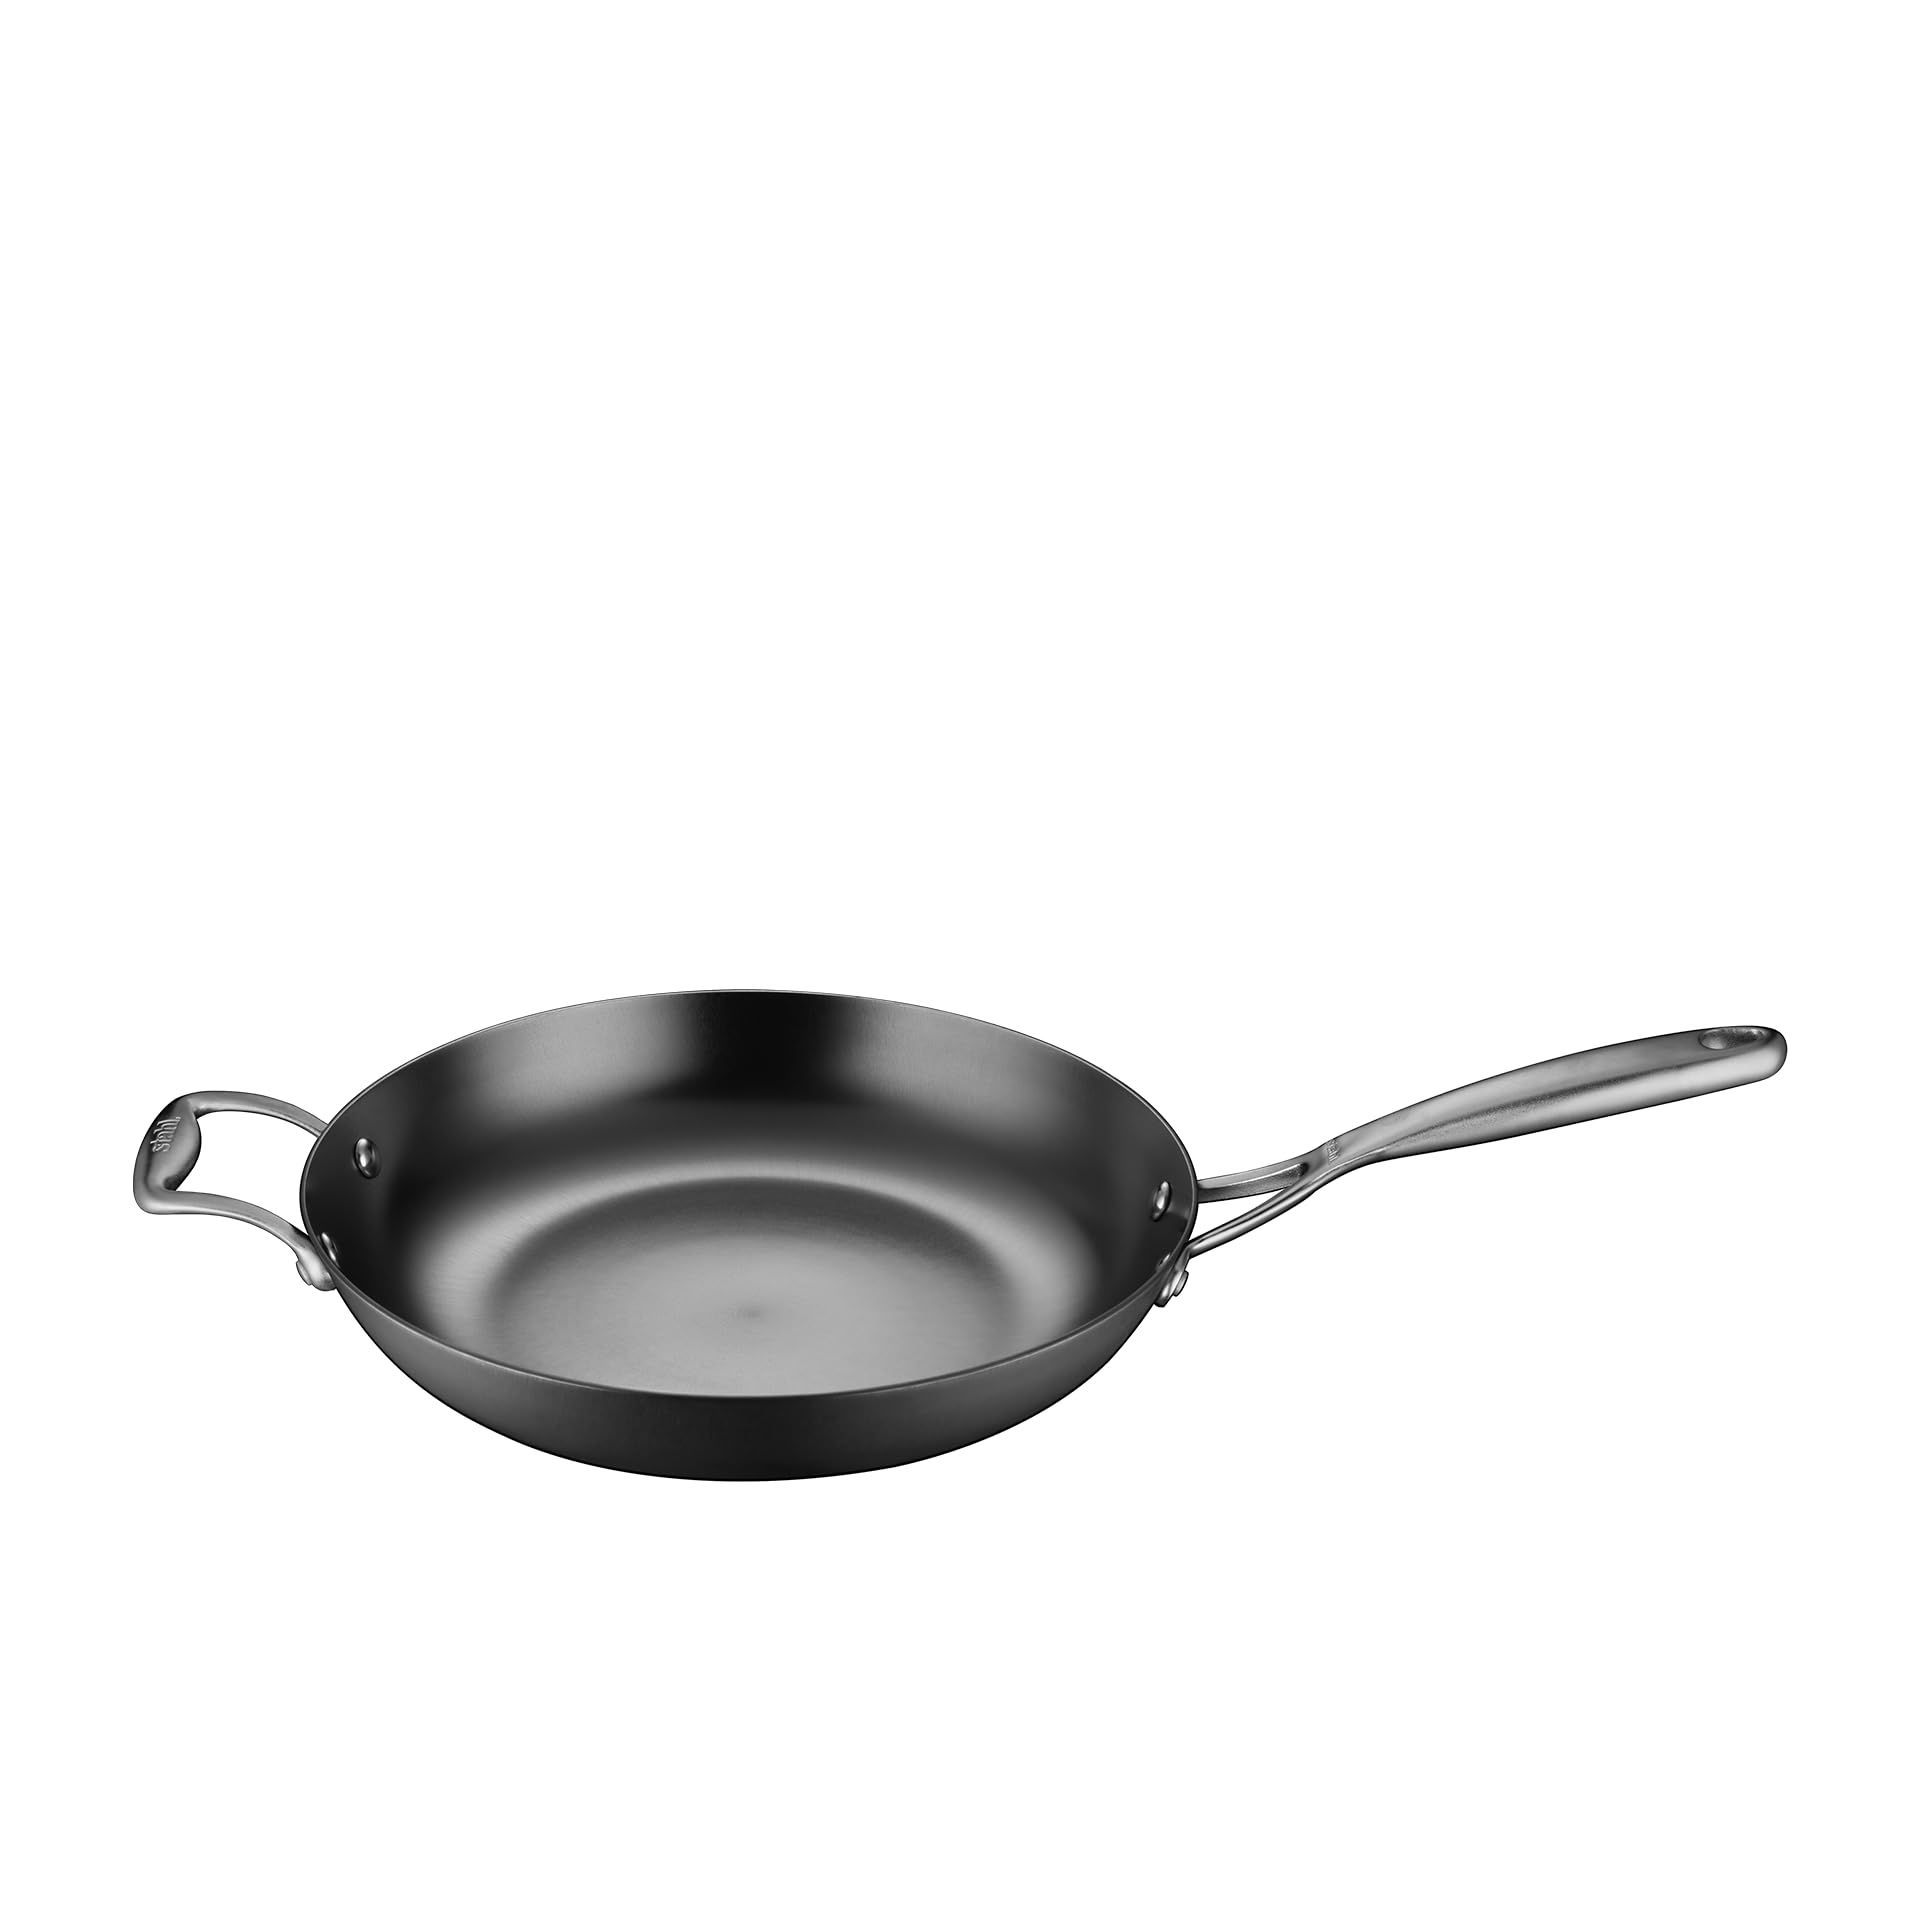 Stahl Cast Iron Blacksmith Plus Frypan, Gas and Induction Base, 7428, 2.4 L, 28 cm (Serves 6 People)